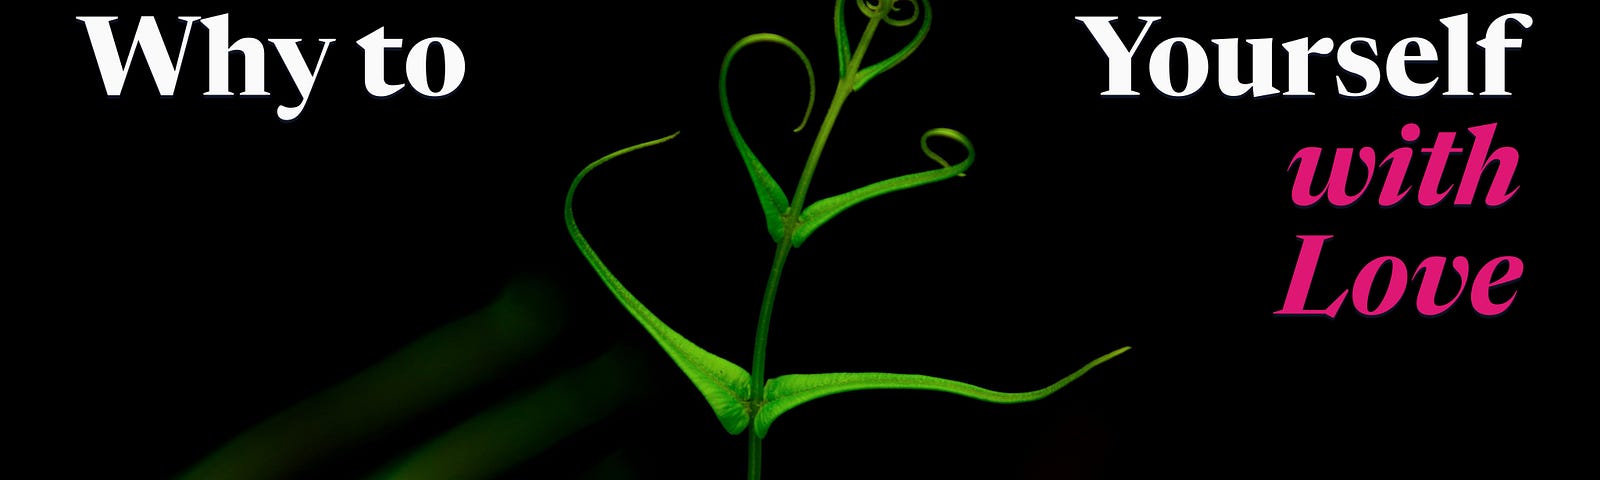 Photo of a sapling growing with its youngest leaves forming the shape of a heart, with text overlaid reading “How & Why to Reinvent Yourself with Love”